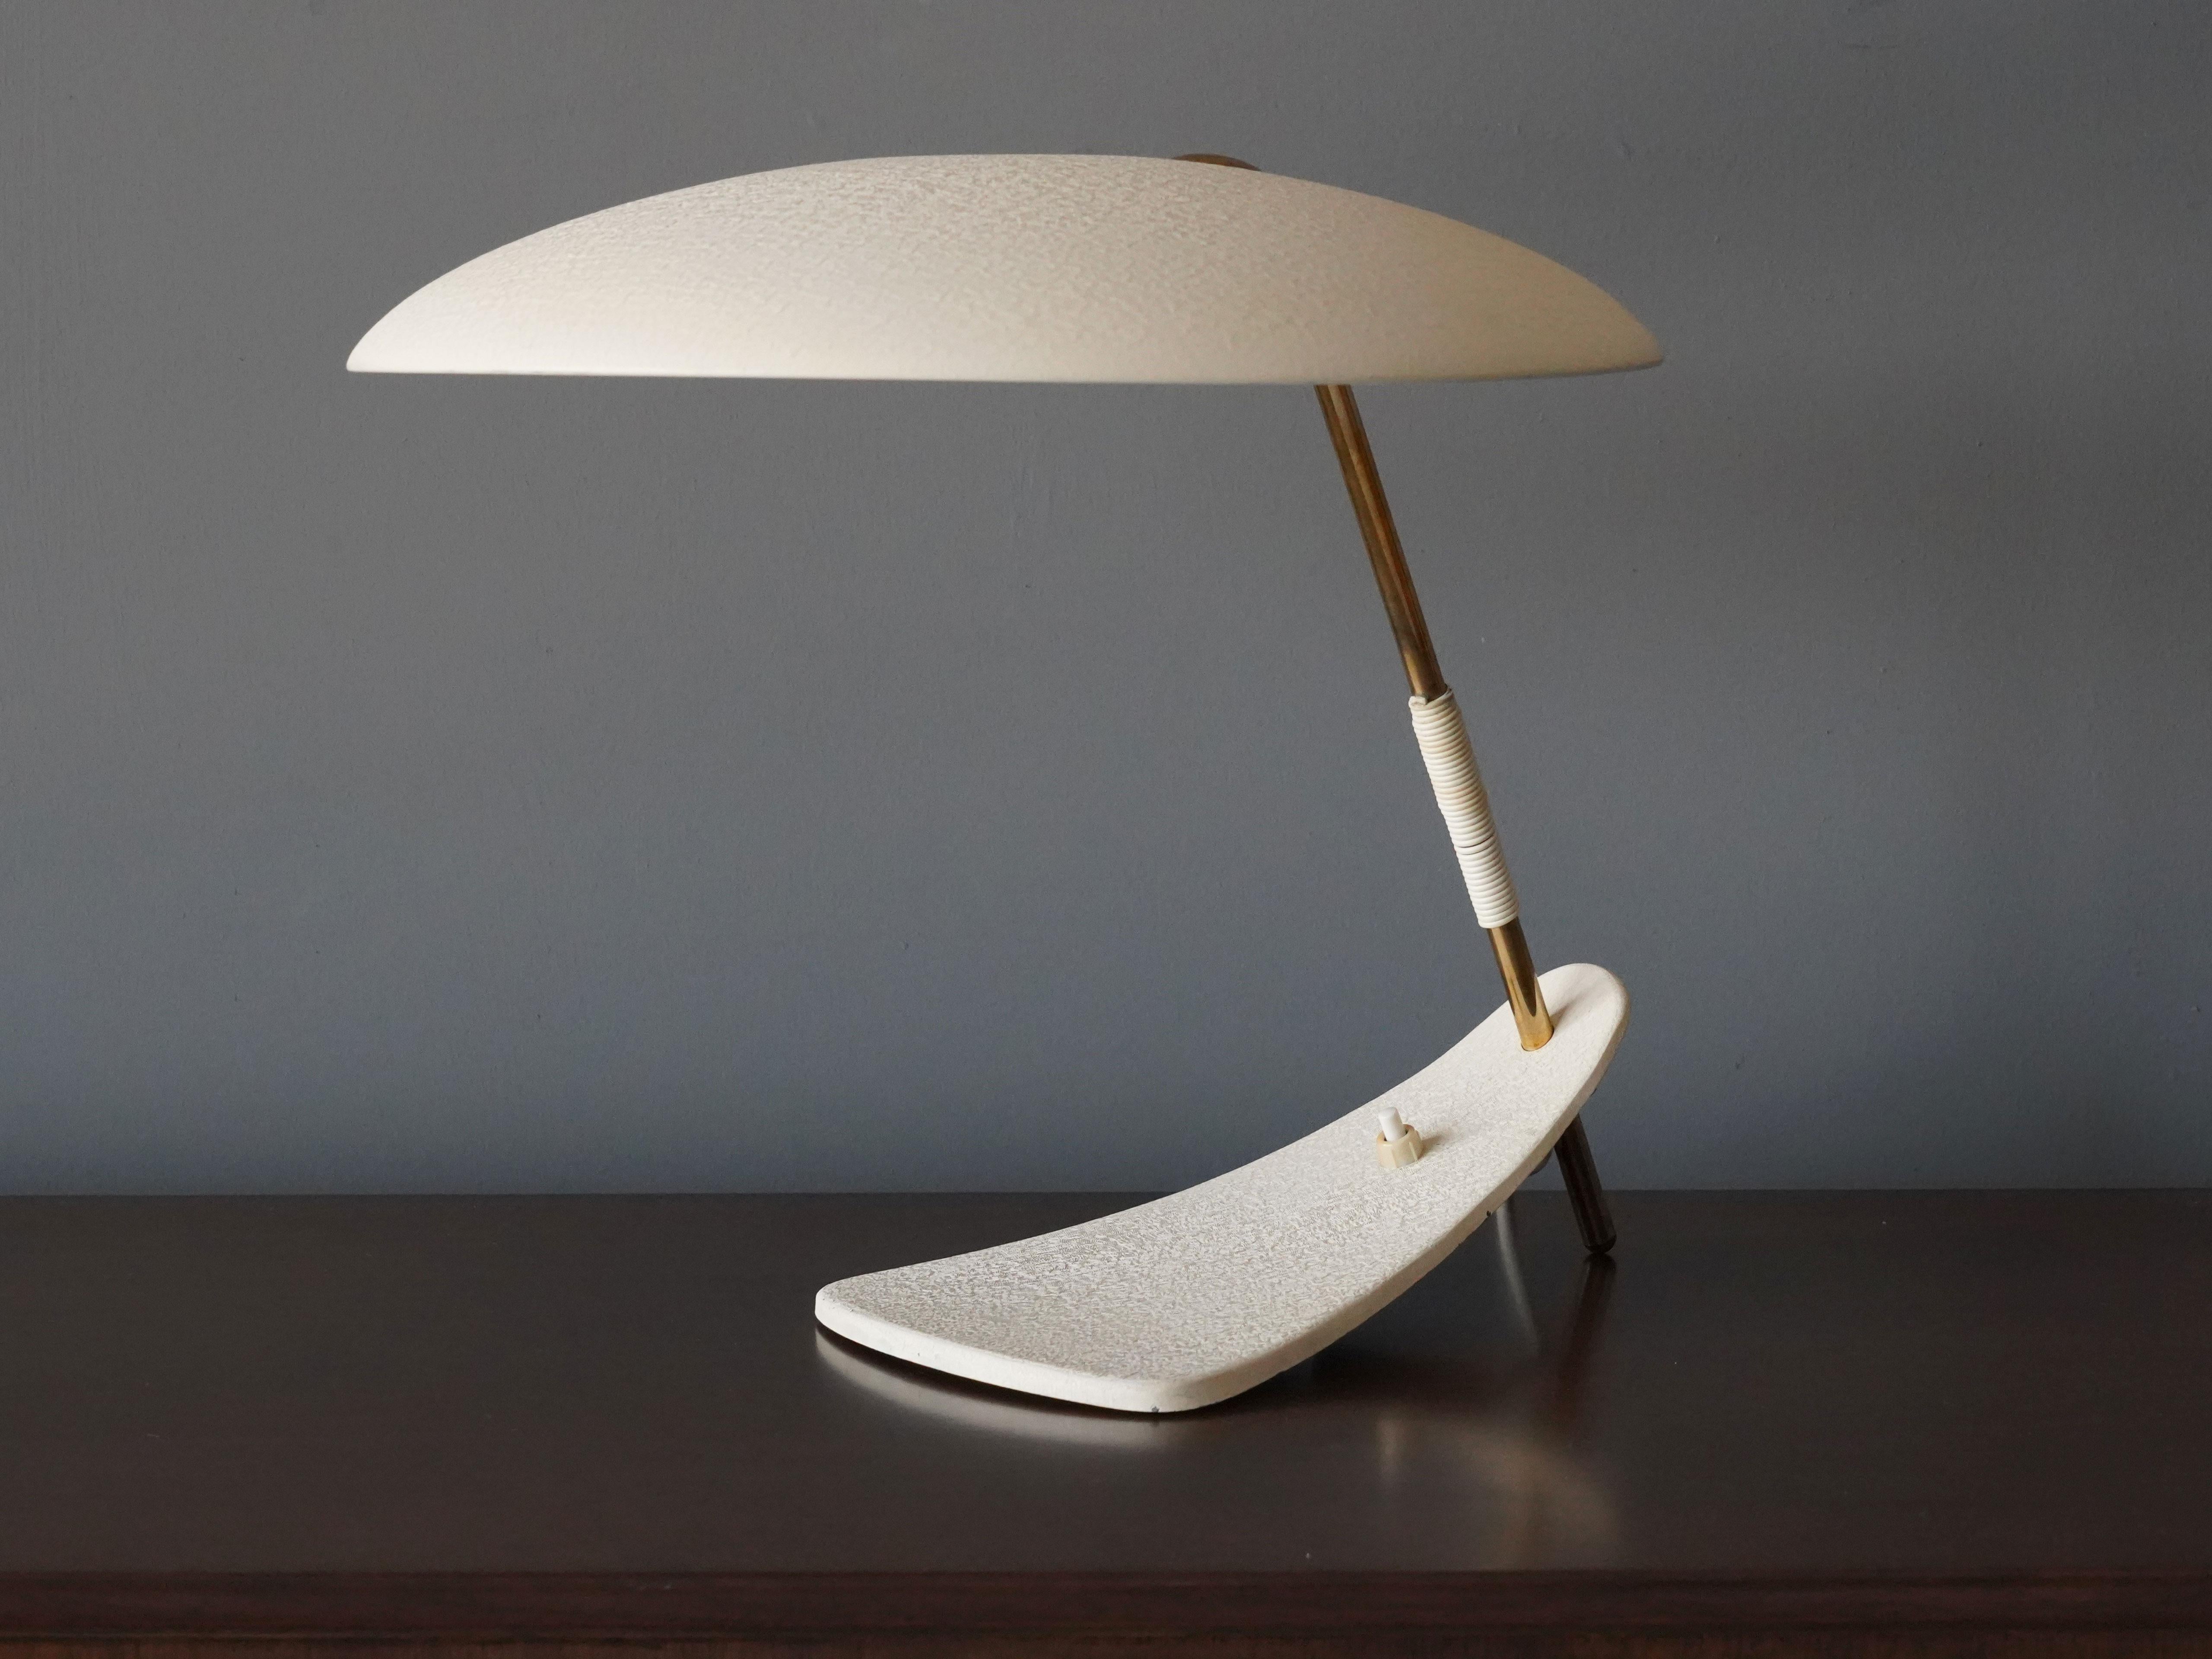 A highly modernist table lamp / desk light. Produced by an unknown designer, Italy, 1960s.

Other designers of the period designing in a similar visual language include Serge Mouille, Angelo Lelii, Max Ingrand, Gino Sarfatti, and Achille